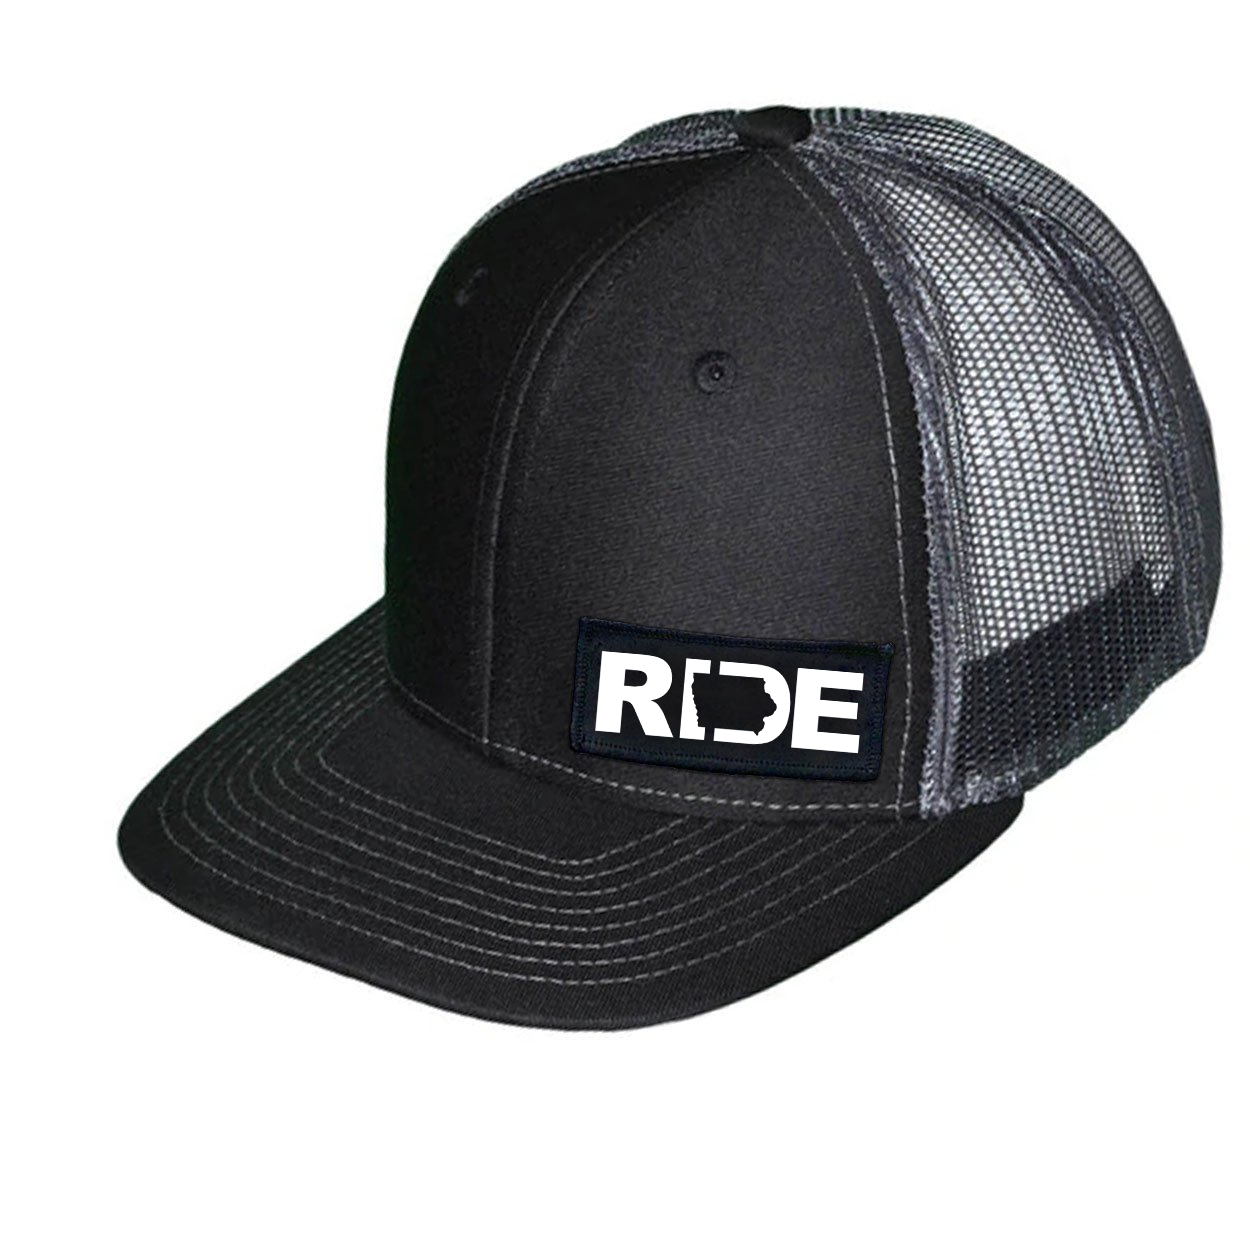 Ride Iowa Night Out Embroidered Snapback Trucker Hat Black/Gray